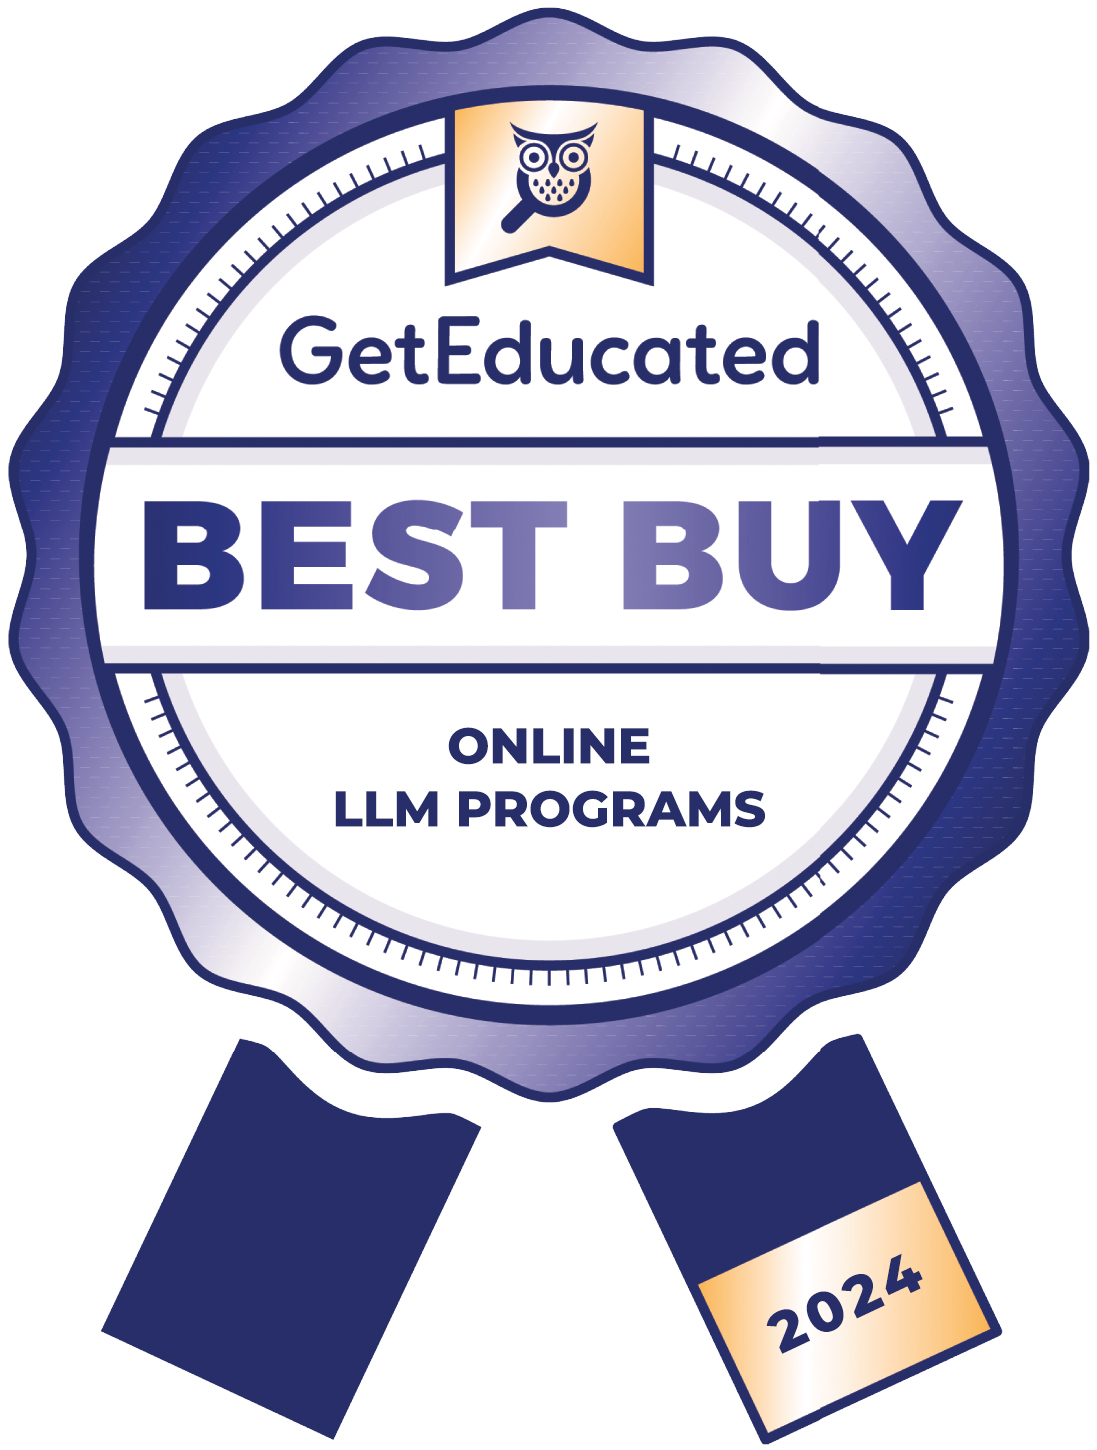 Rankings of the cheapest online LLM programs